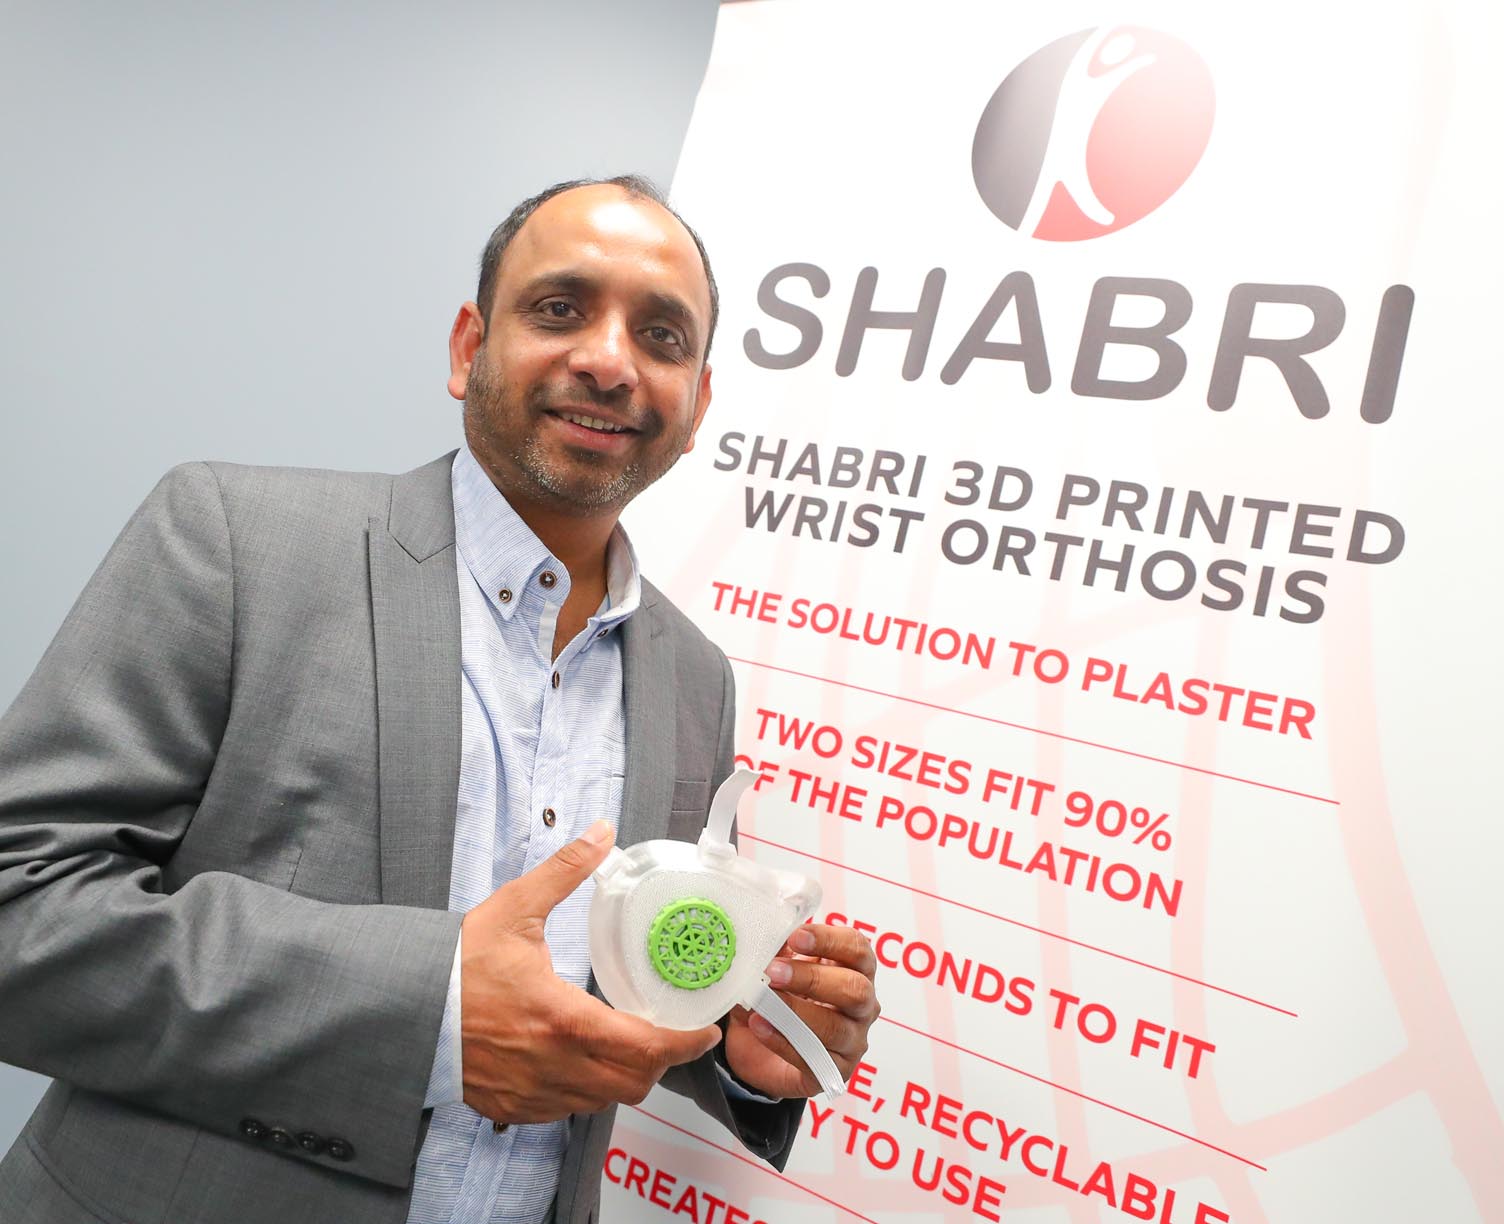 UNK graduate Rakesh Srivastava is using his 3D-printing company, Shabri, to help meet the local demand for face masks and shields during the coronavirus outbreak. (Photos by Corbey R. Dorsey, UNK Communications)